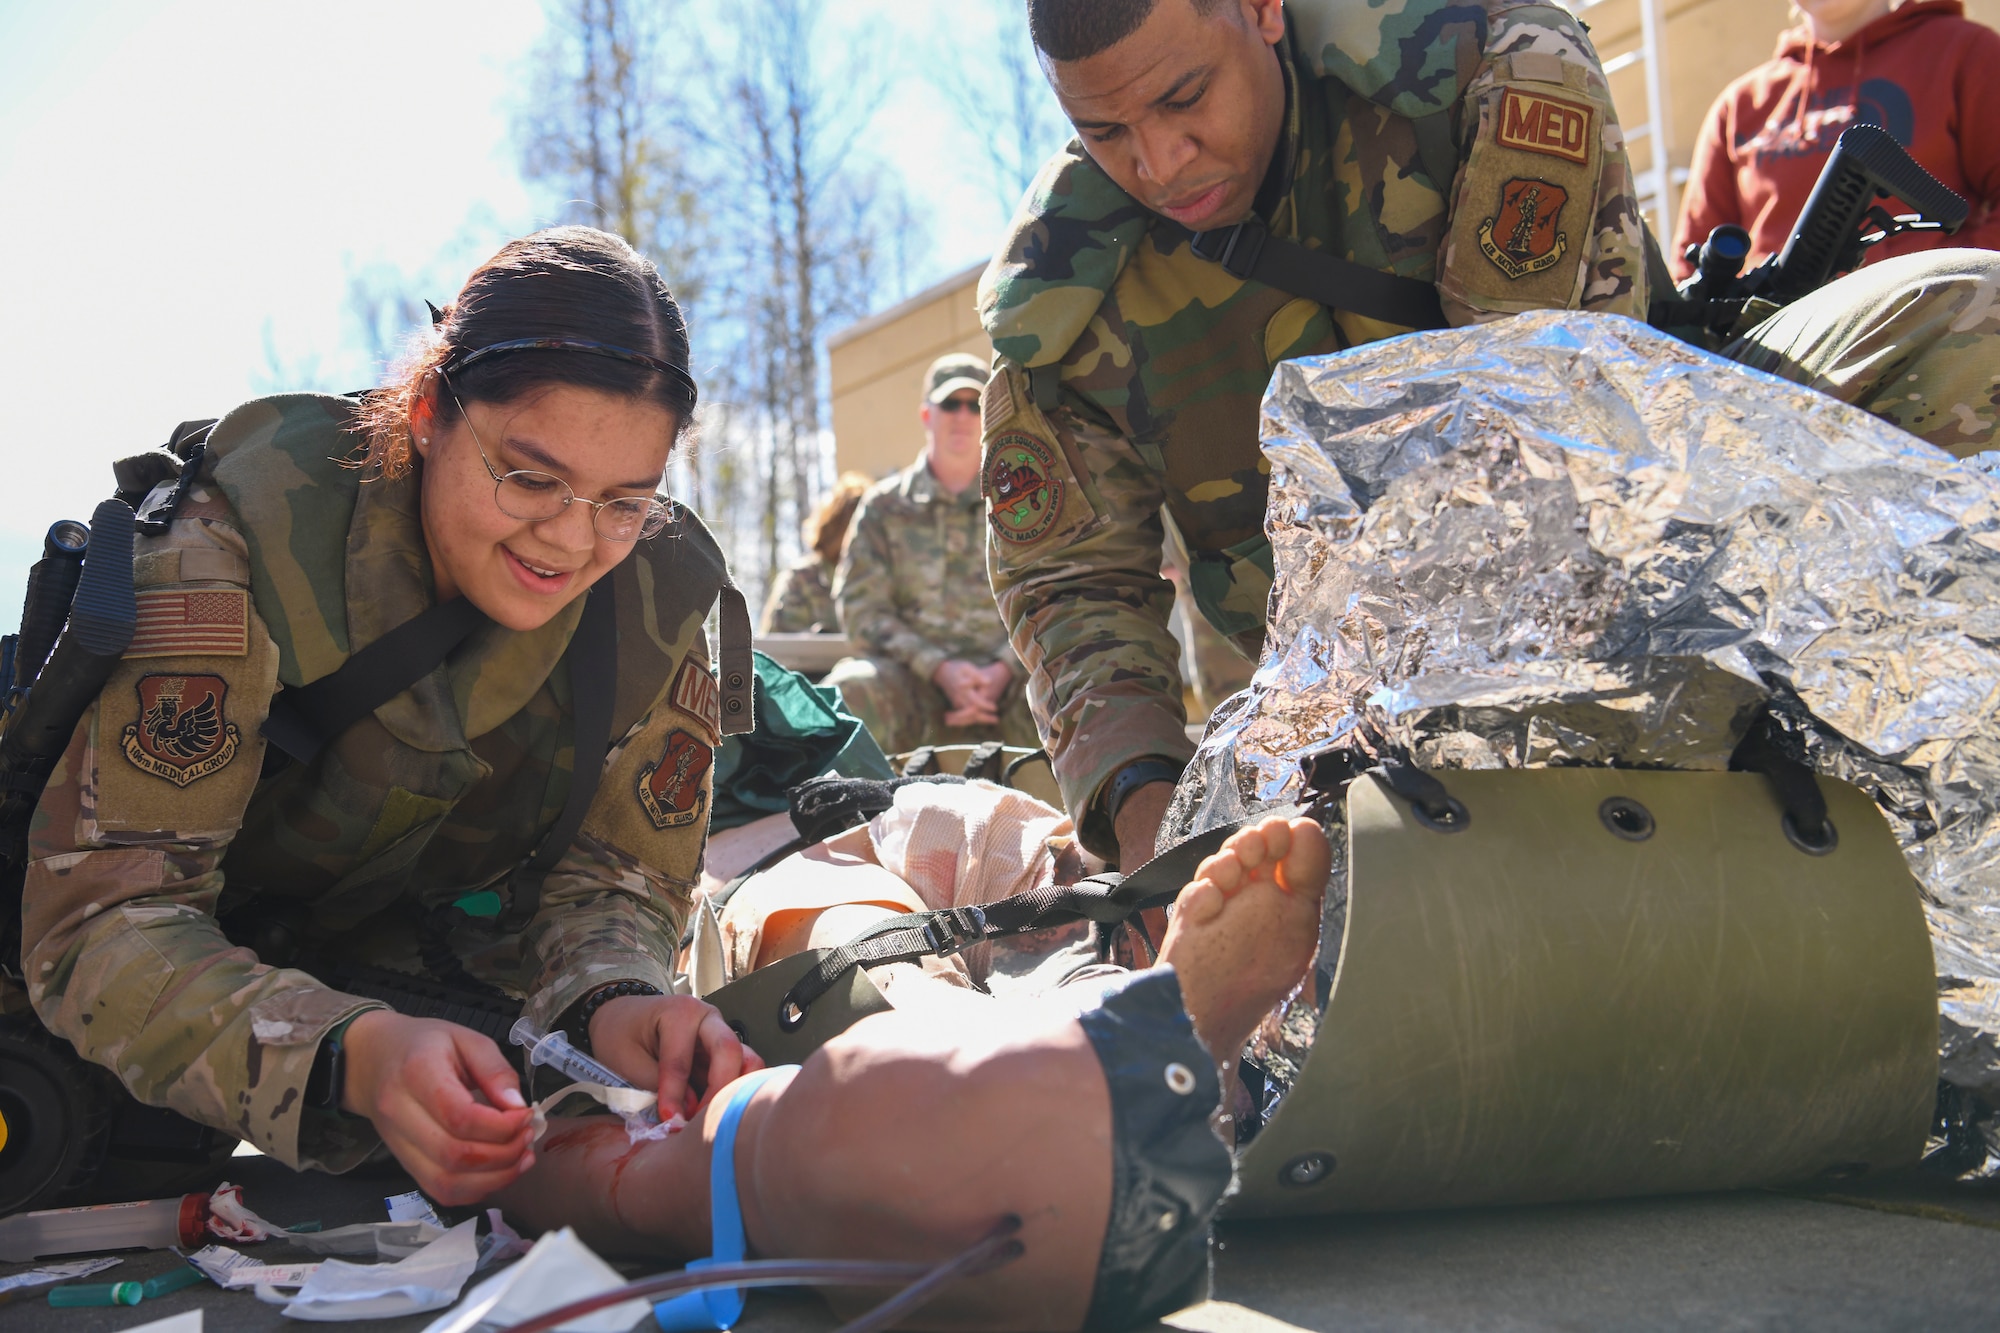 N.Y. Air National Guard 106th Rescue Wing Senior Airman Catalina Garcia-Canas, a 106th combat medic, injects medicine in the arm a “patient,” an advanced medical simulation dummy, at Joint Base Elmendorf-Richardson in Anchorage, Alaska, May 5, 2022. The combat medics of the 106th Medical Group participated in their first Military Facility Annual Training since the start of the COVID-19 pandemic, and were expected to encounter a patient, assess the injuries, mitigate the risk, stop bleeding, treat secondary wounds, and/or resuscitate the patient and maintain the airway. (Air National Guard photo by SSgt Daniel H. Farrell)